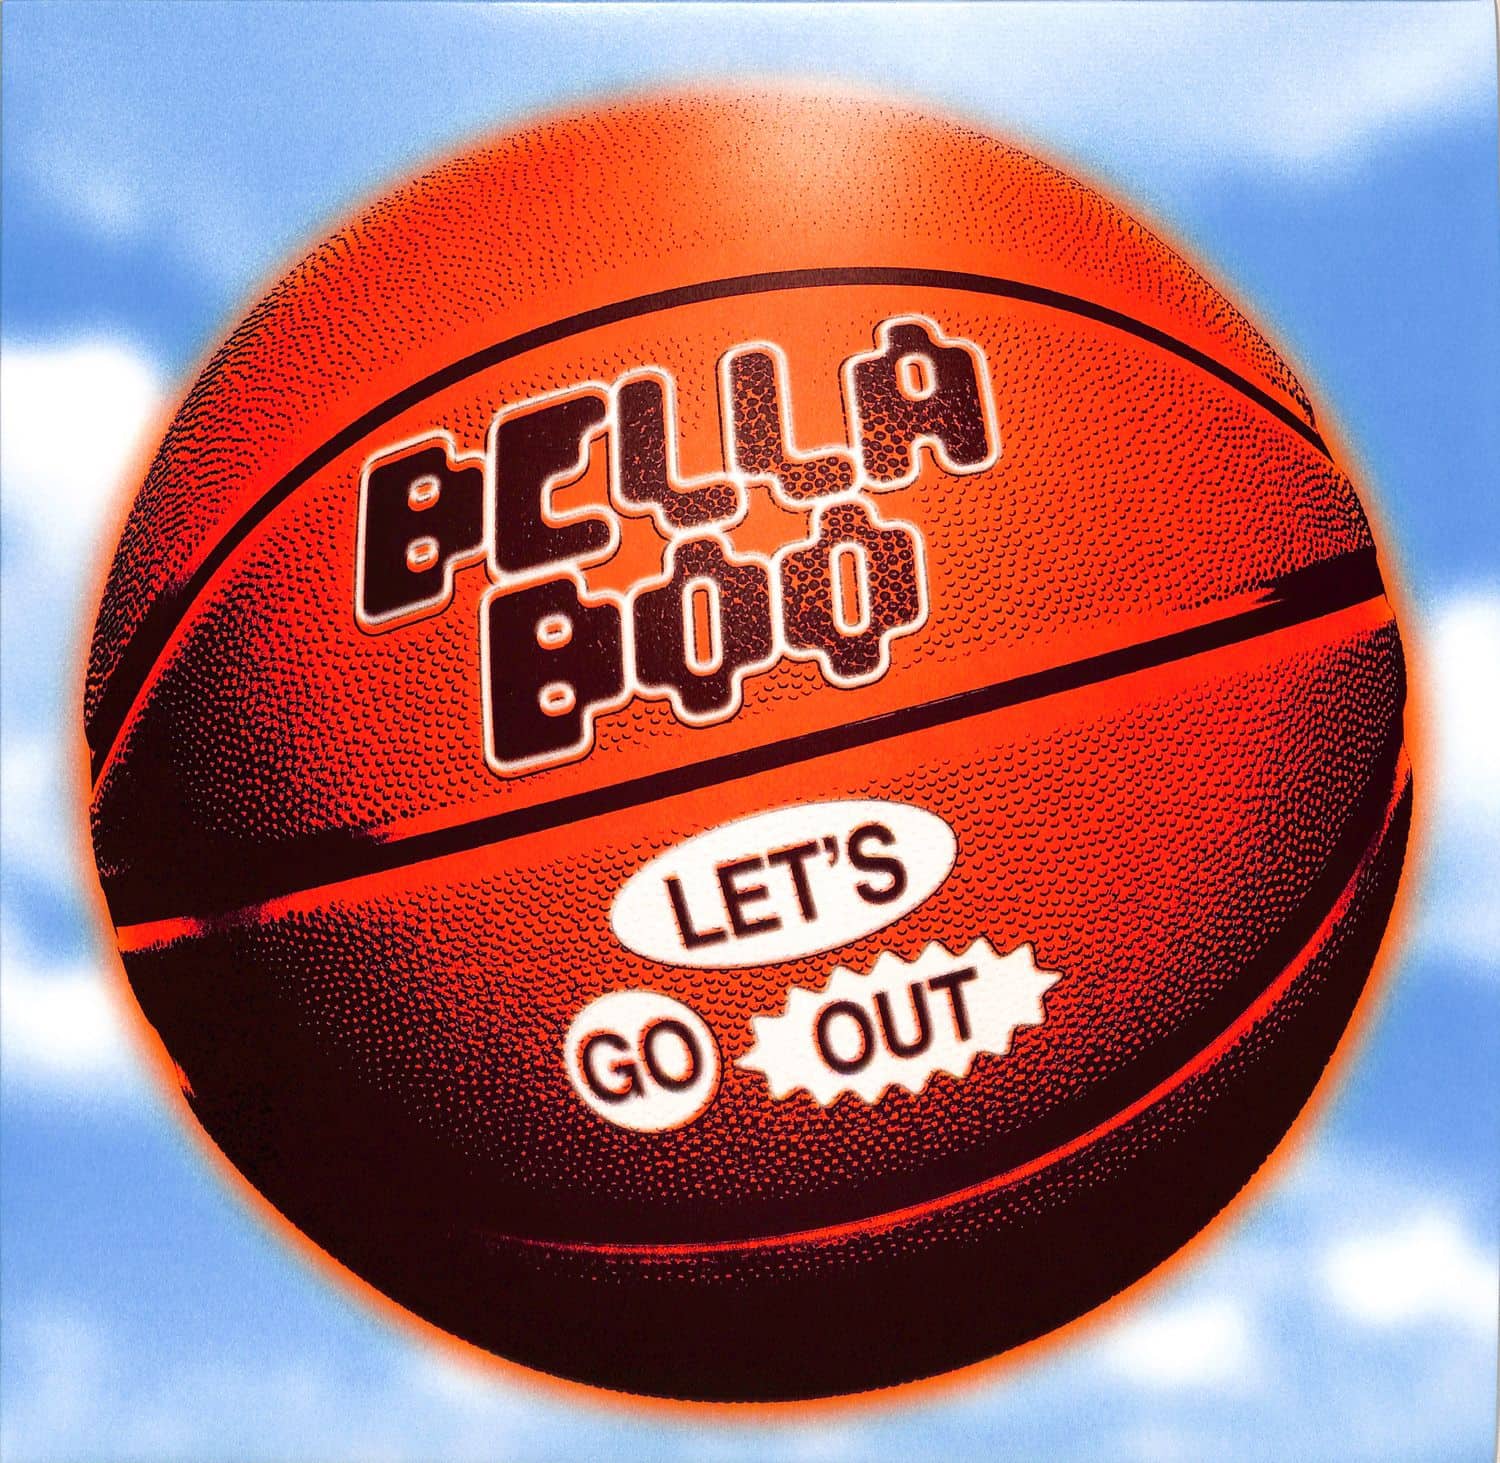 Bella Boo - LETS GO OUT